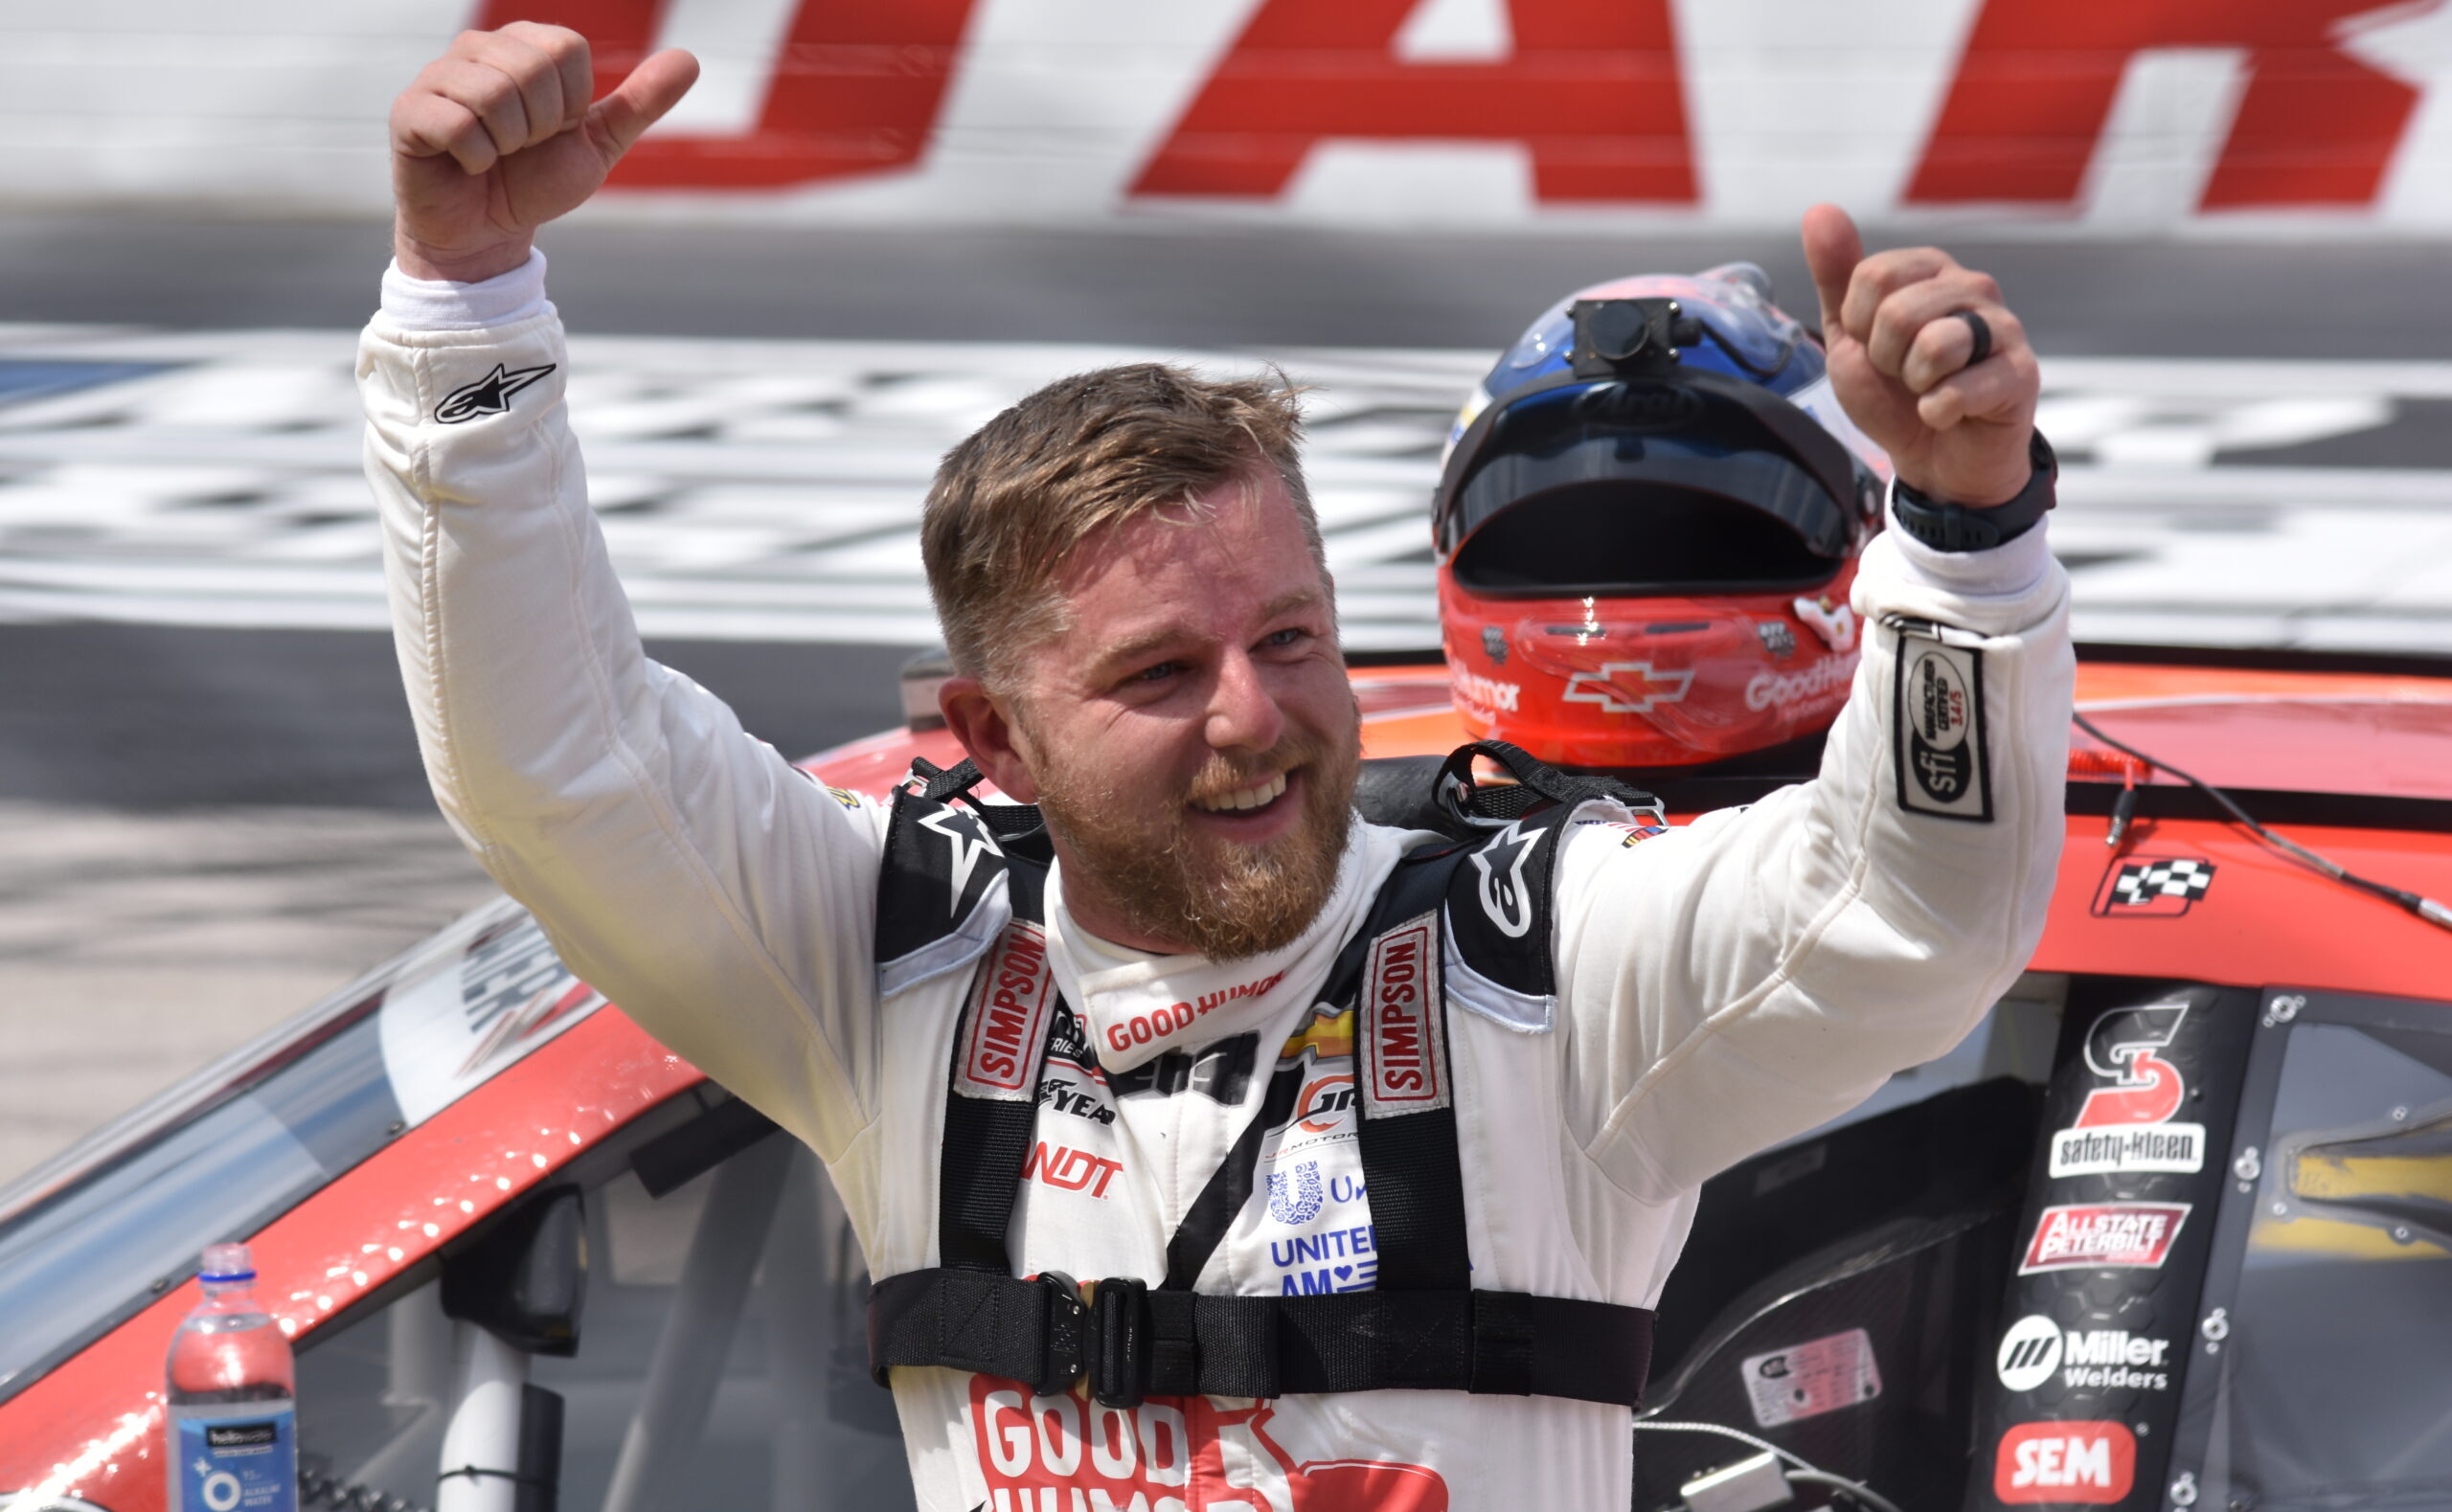 Truly, Justin Allgaier seems championship ready after his Darlington win. (Photo: Luis Torres/The Podium Finish)